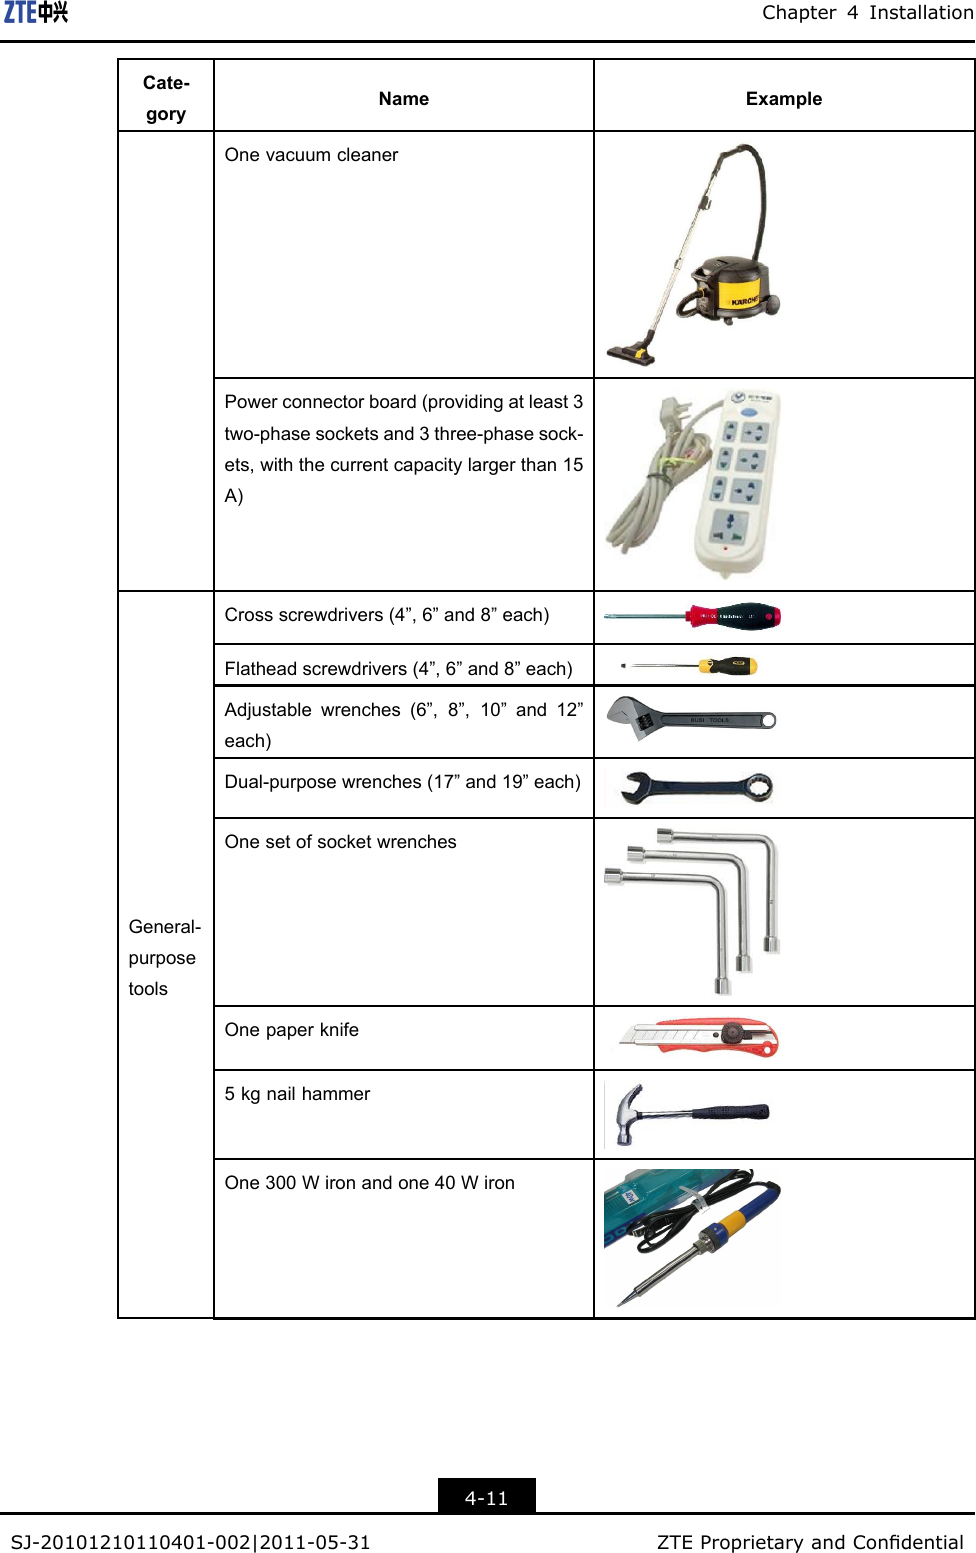 Chapter4InstallationCate-goryNameExampleOnevacuumcleanerPowerconnectorboard(providingatleast3two-phasesocketsand3three-phasesock-ets,withthecurrentcapacitylargerthan15A)Crossscrewdrivers(4”,6”and8”each)Flatheadscrewdrivers(4”,6”and8”each)Adjustablewrenches(6”,8”,10”and12”each)Dual-purposewrenches(17”and19”each)OnesetofsocketwrenchesOnepaperknife5kgnailhammerOne300Wironandone40WironGeneral-purposetools4-11SJ-20101210110401-002|2011-05-31ZTEProprietaryandCondential